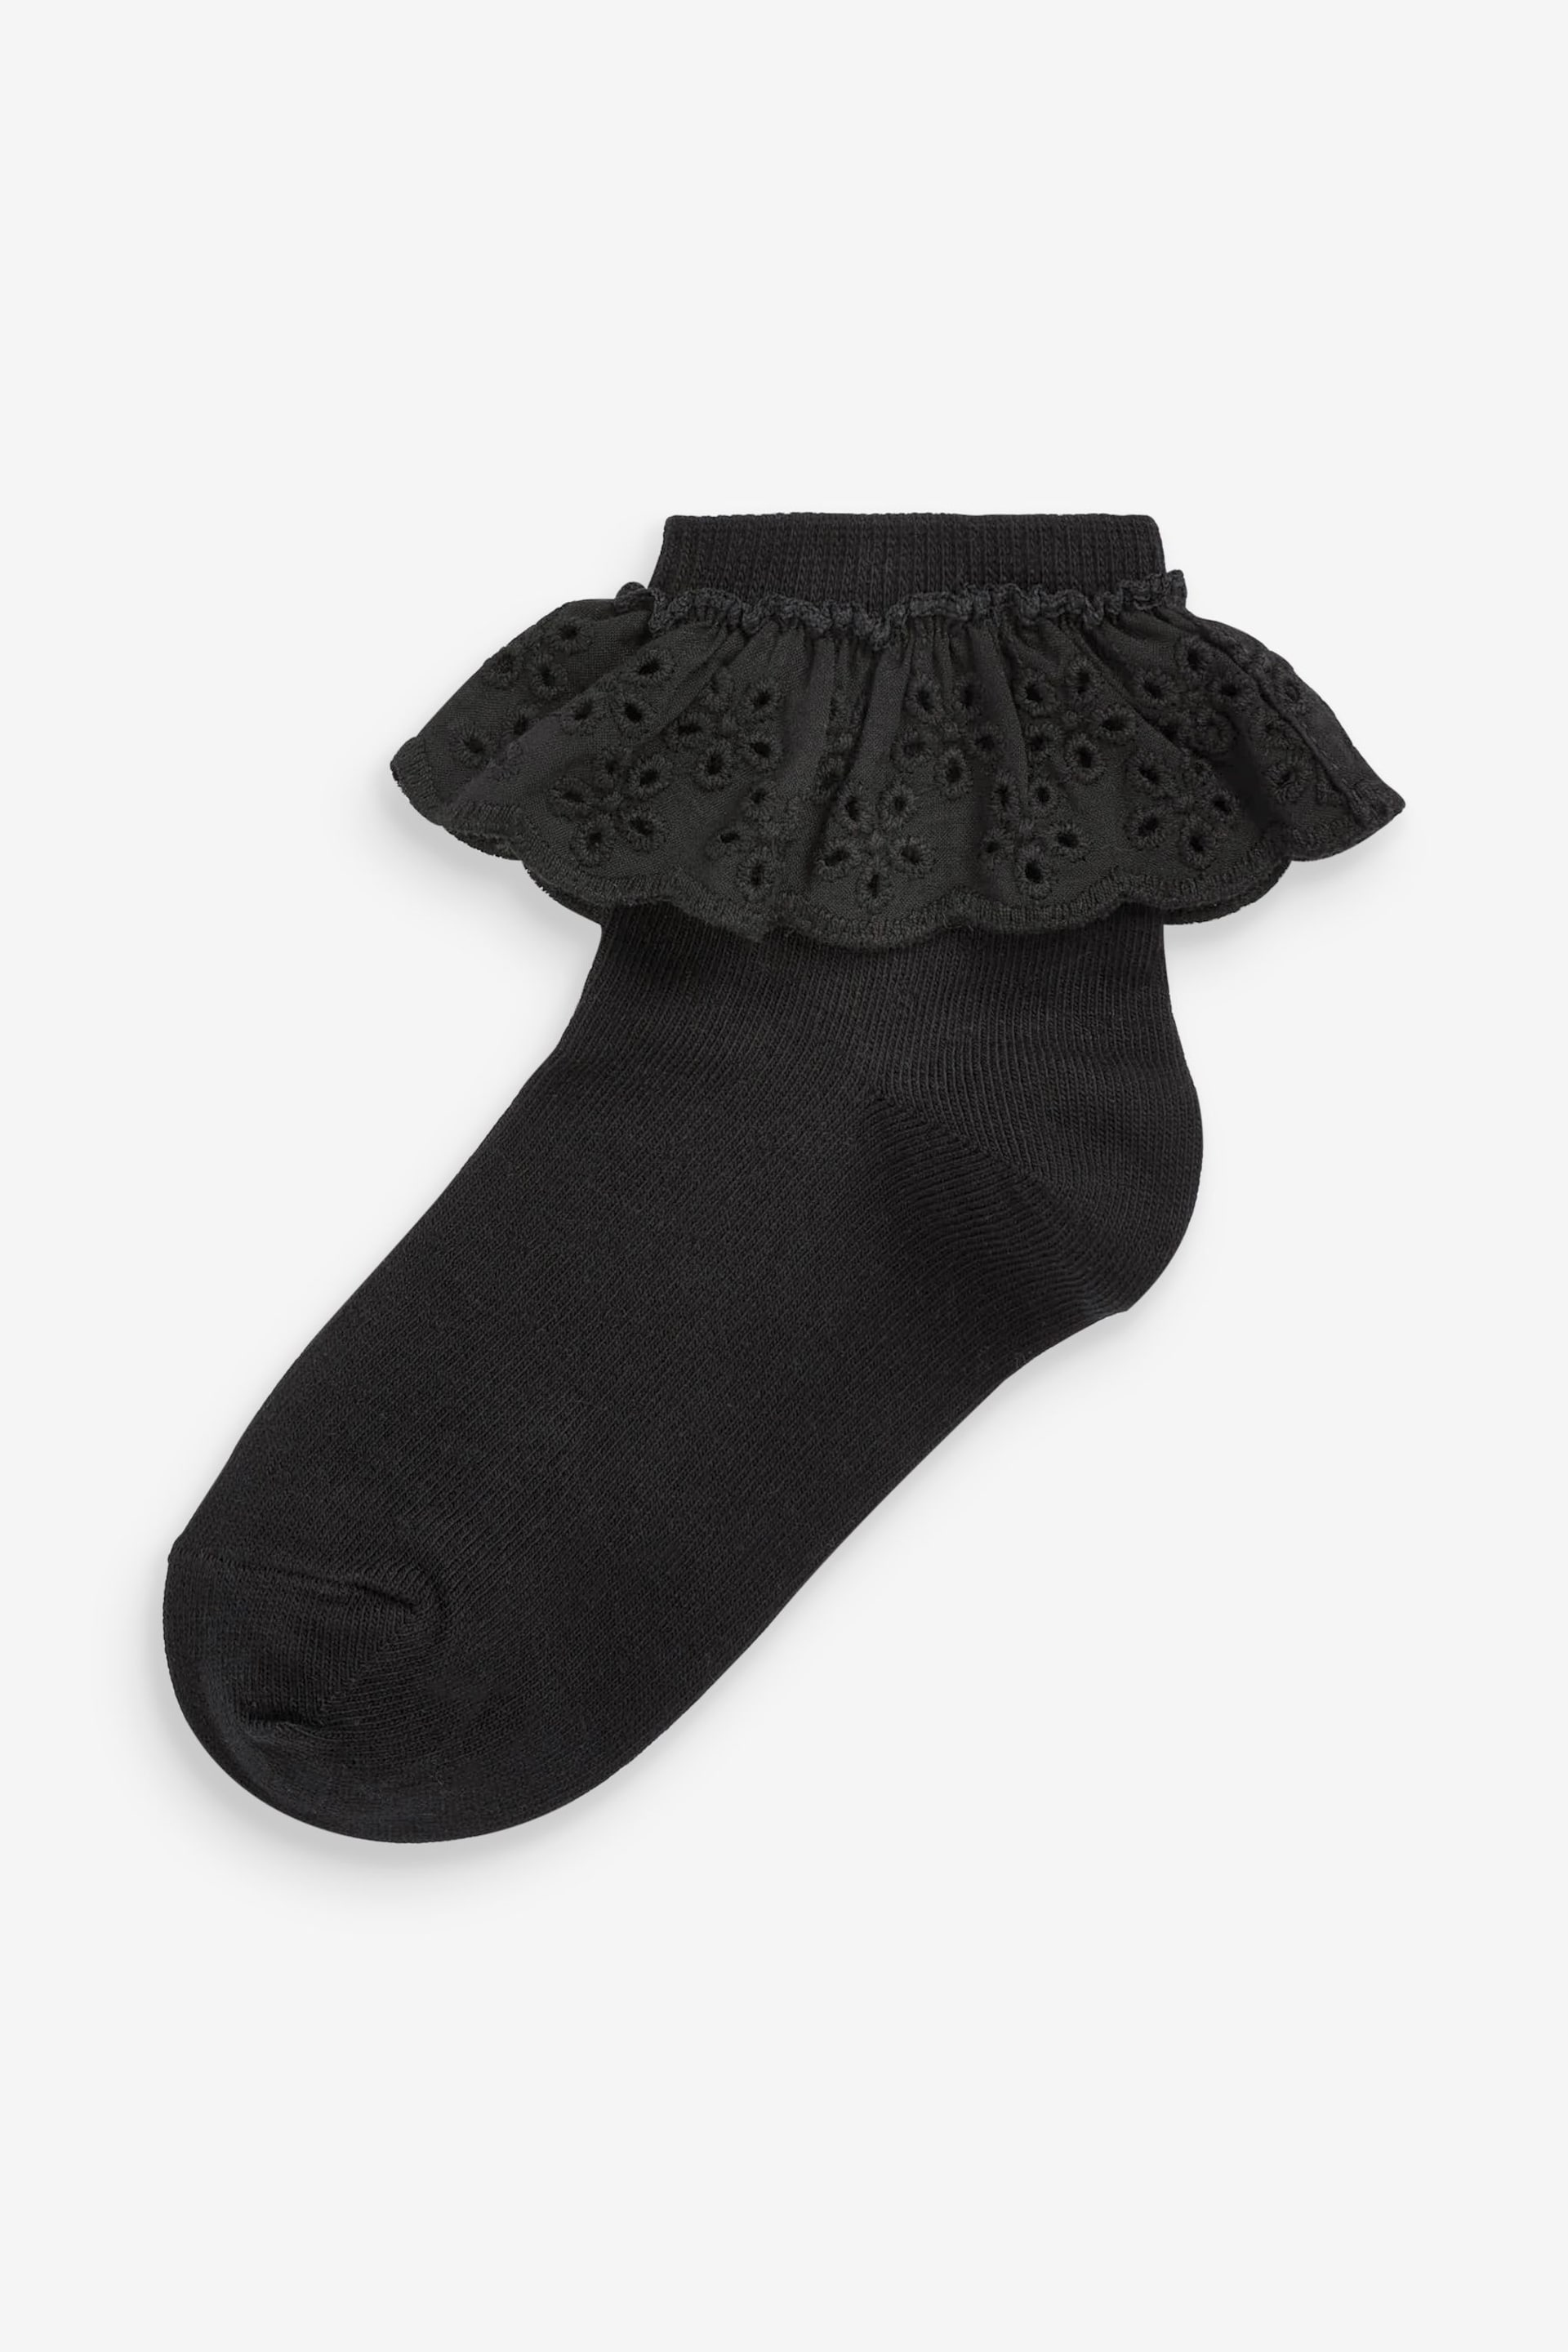 Black Cotton Rich Ruffle Ankle Socks 2 Pack - Image 3 of 3